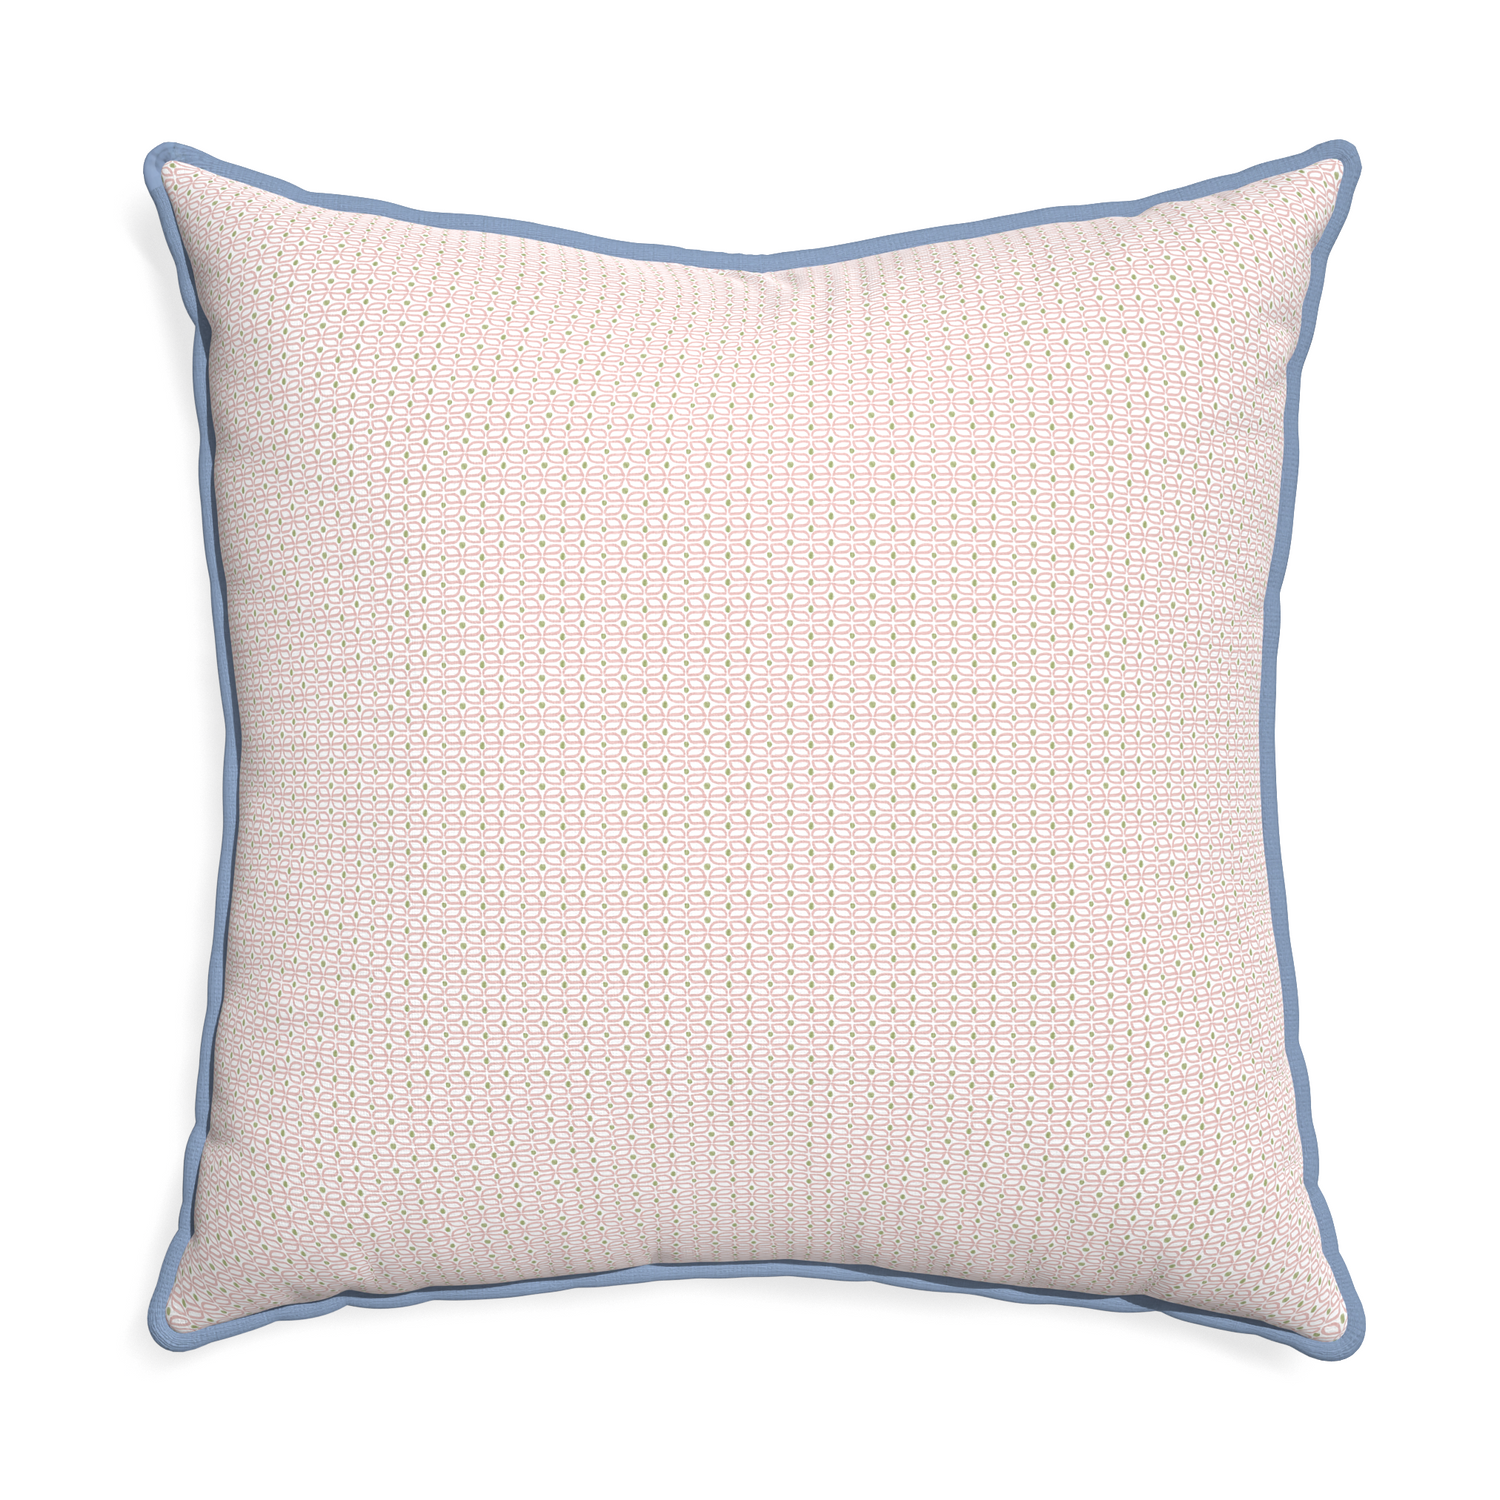 Euro-sham loomi pink custom pink geometricpillow with sky piping on white background